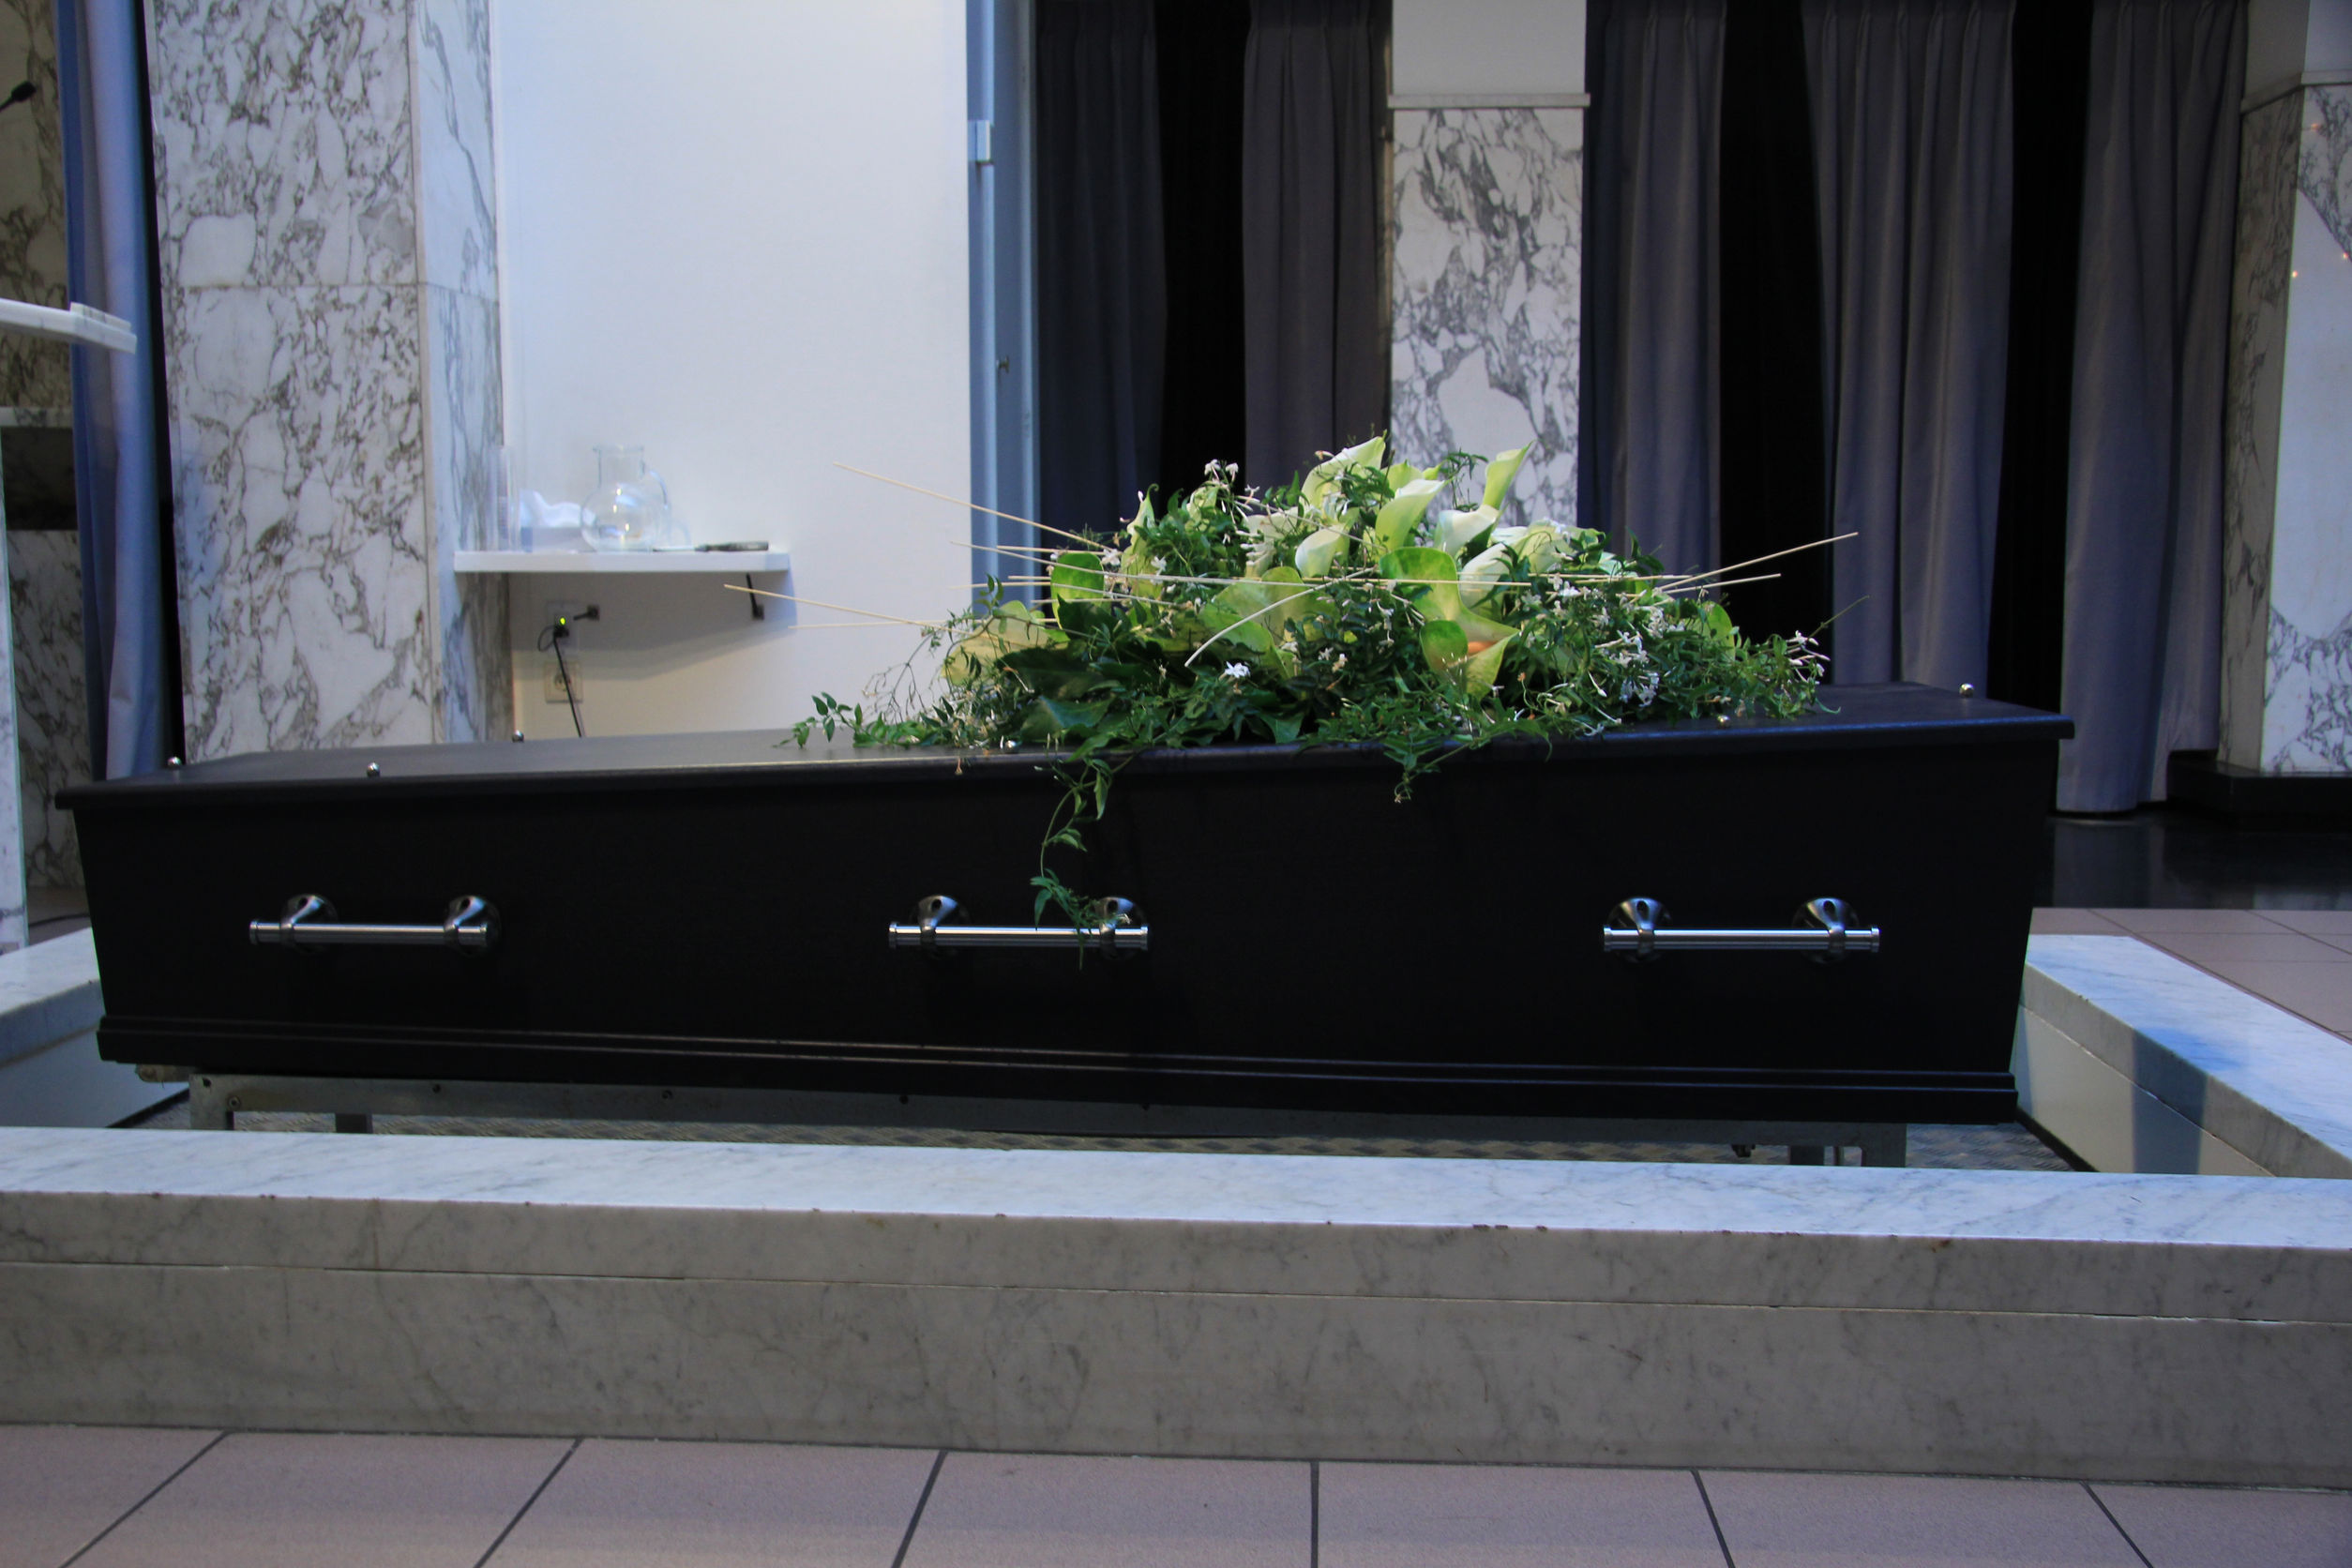 Funeral Directors in Bel Air Provide Compassionate Service After an Unexpected Death